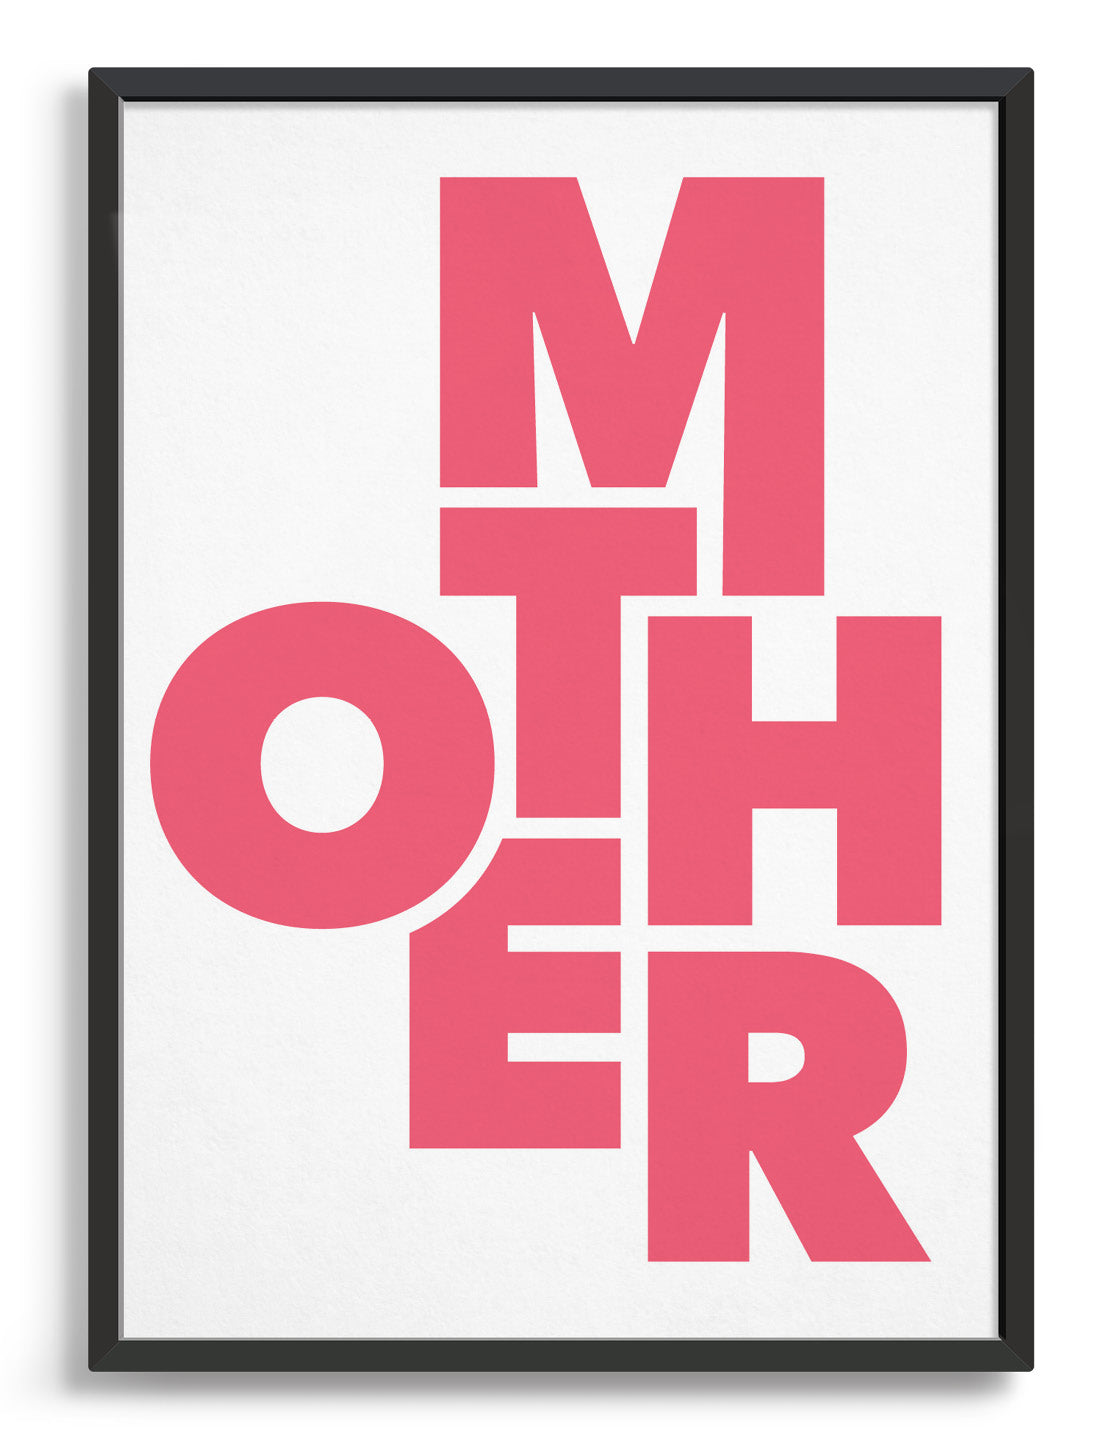 framed typography art print of the word mother in pink text against a white background